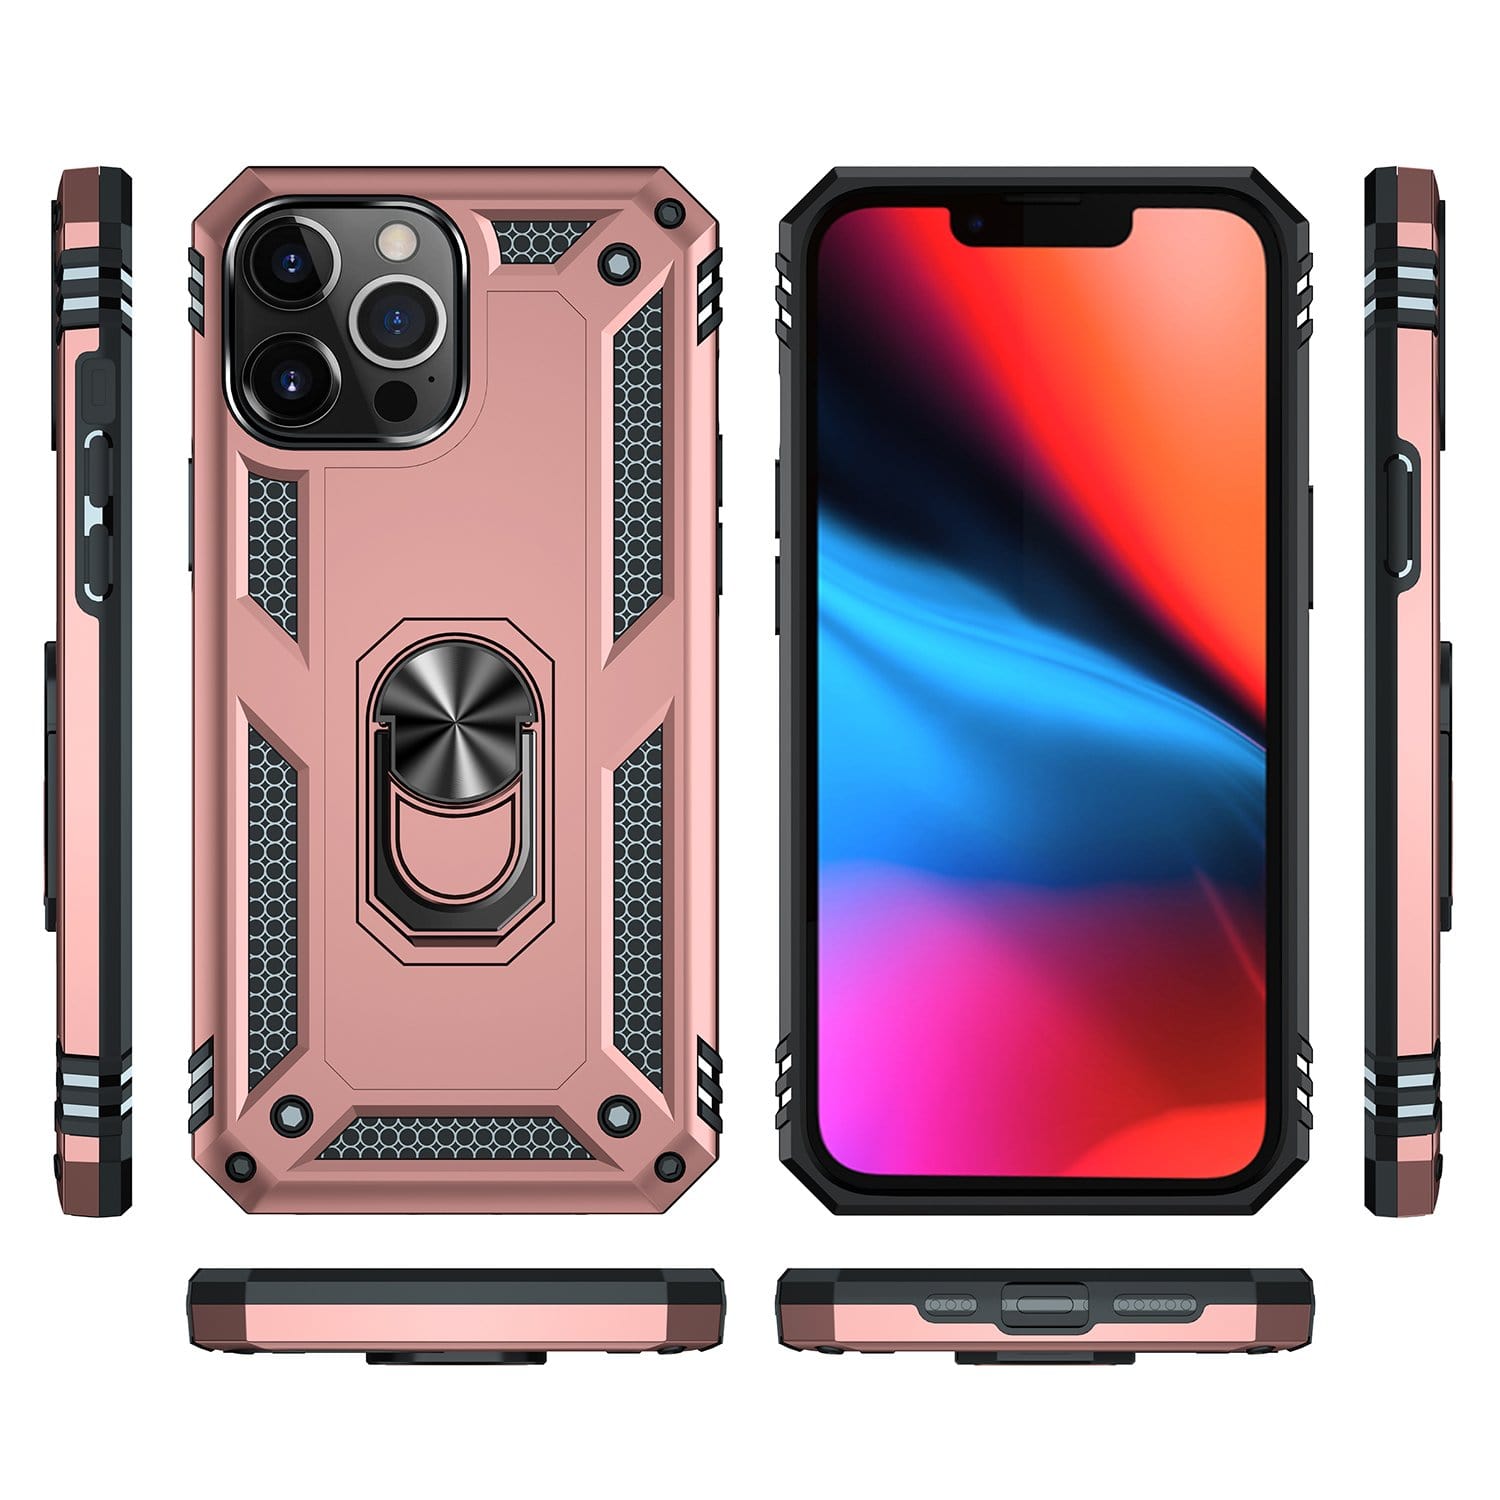 Rose Gold Apple iPhone 13 Pro Max Case - Kickstand Series with Belt Clip